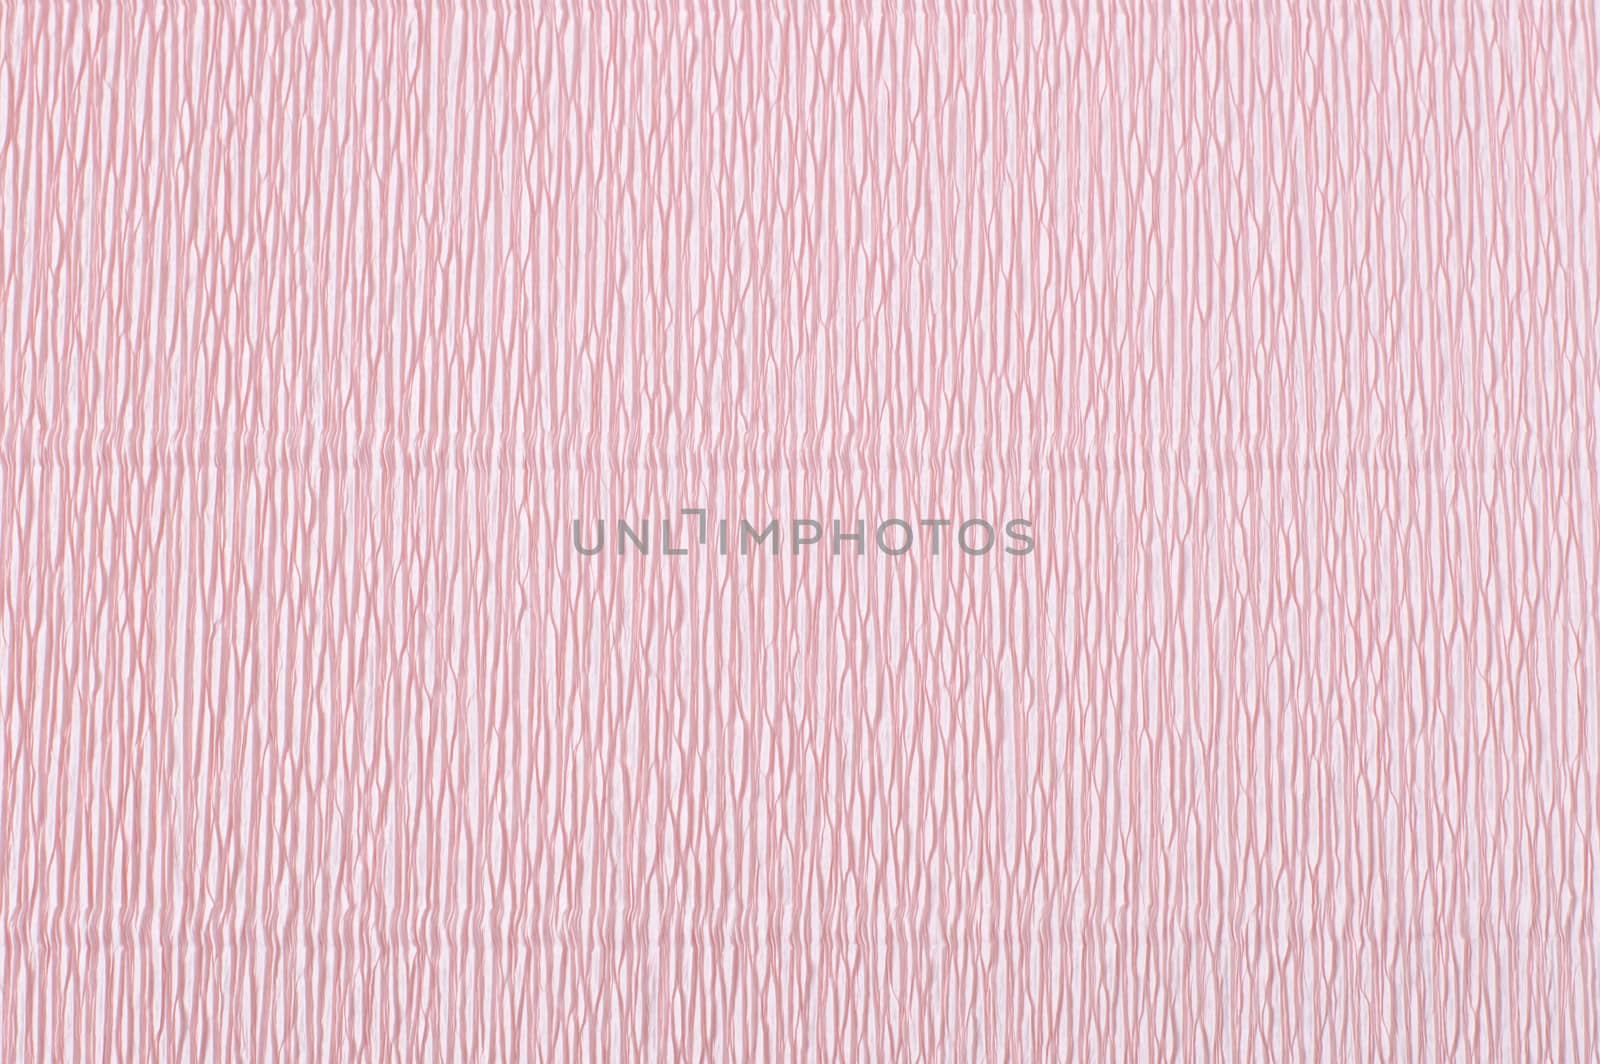 Pink corrugated paper. Crepe paper texture. Light pink abstract paper background. Paper wrinkles, wavy surface